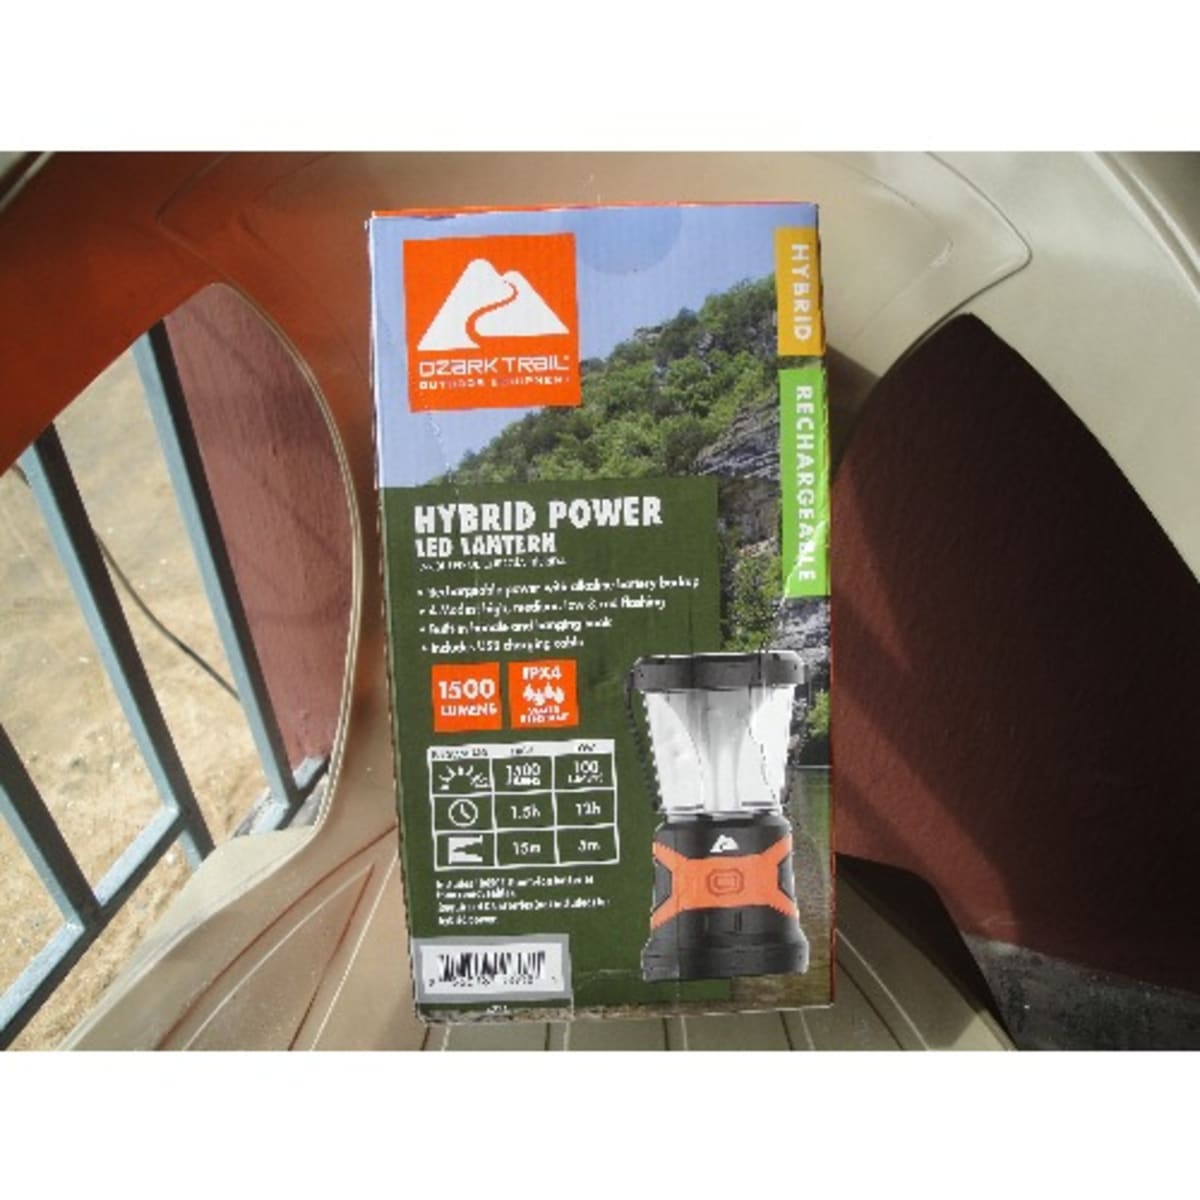 Ozark Trail 1500 Lumens LED Hybrid Power Lantern with Rechargeable